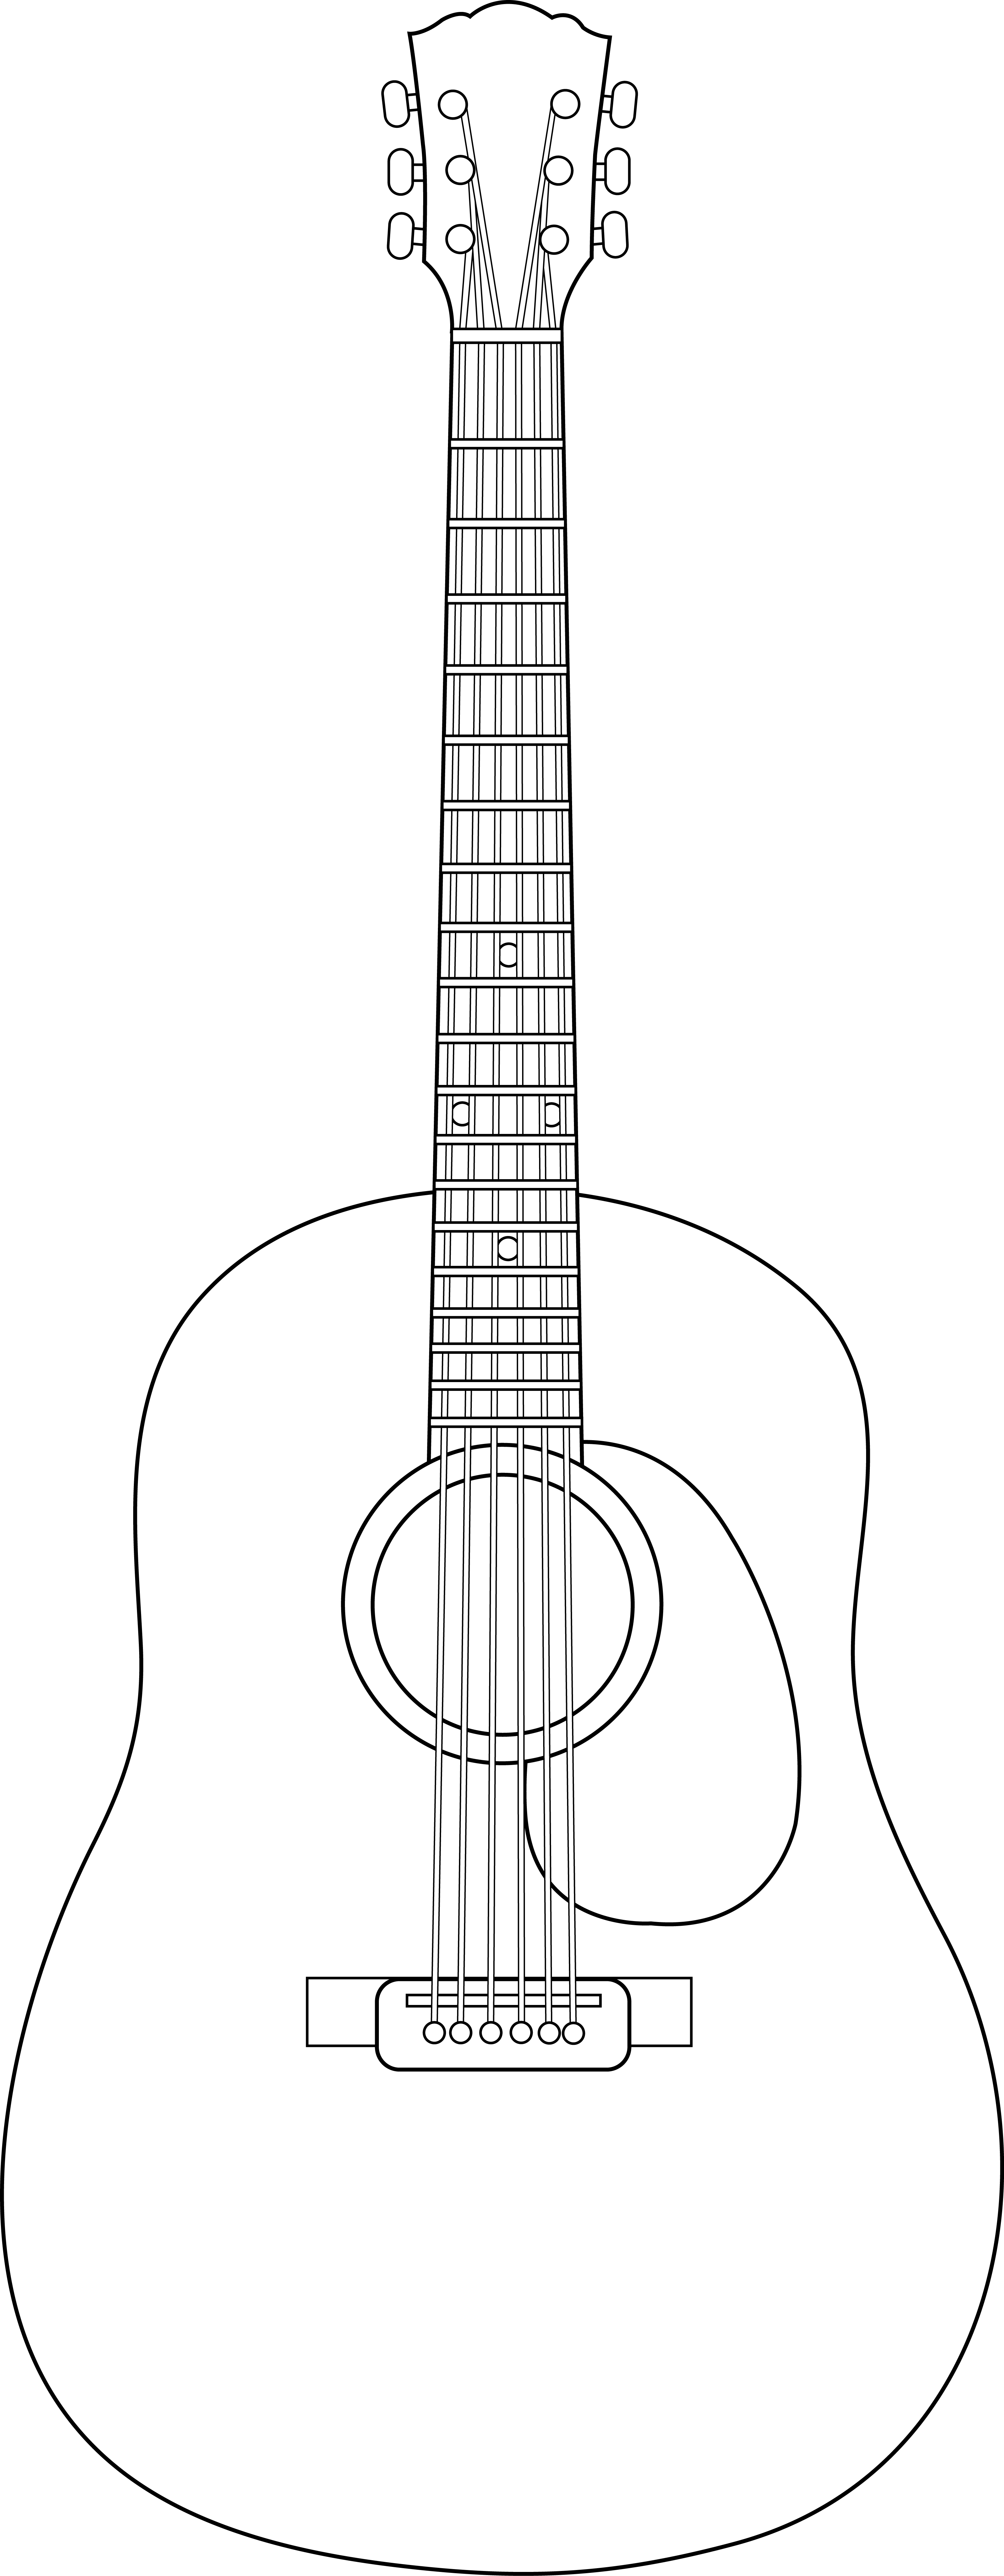 Guitar strings clipart - Clipground